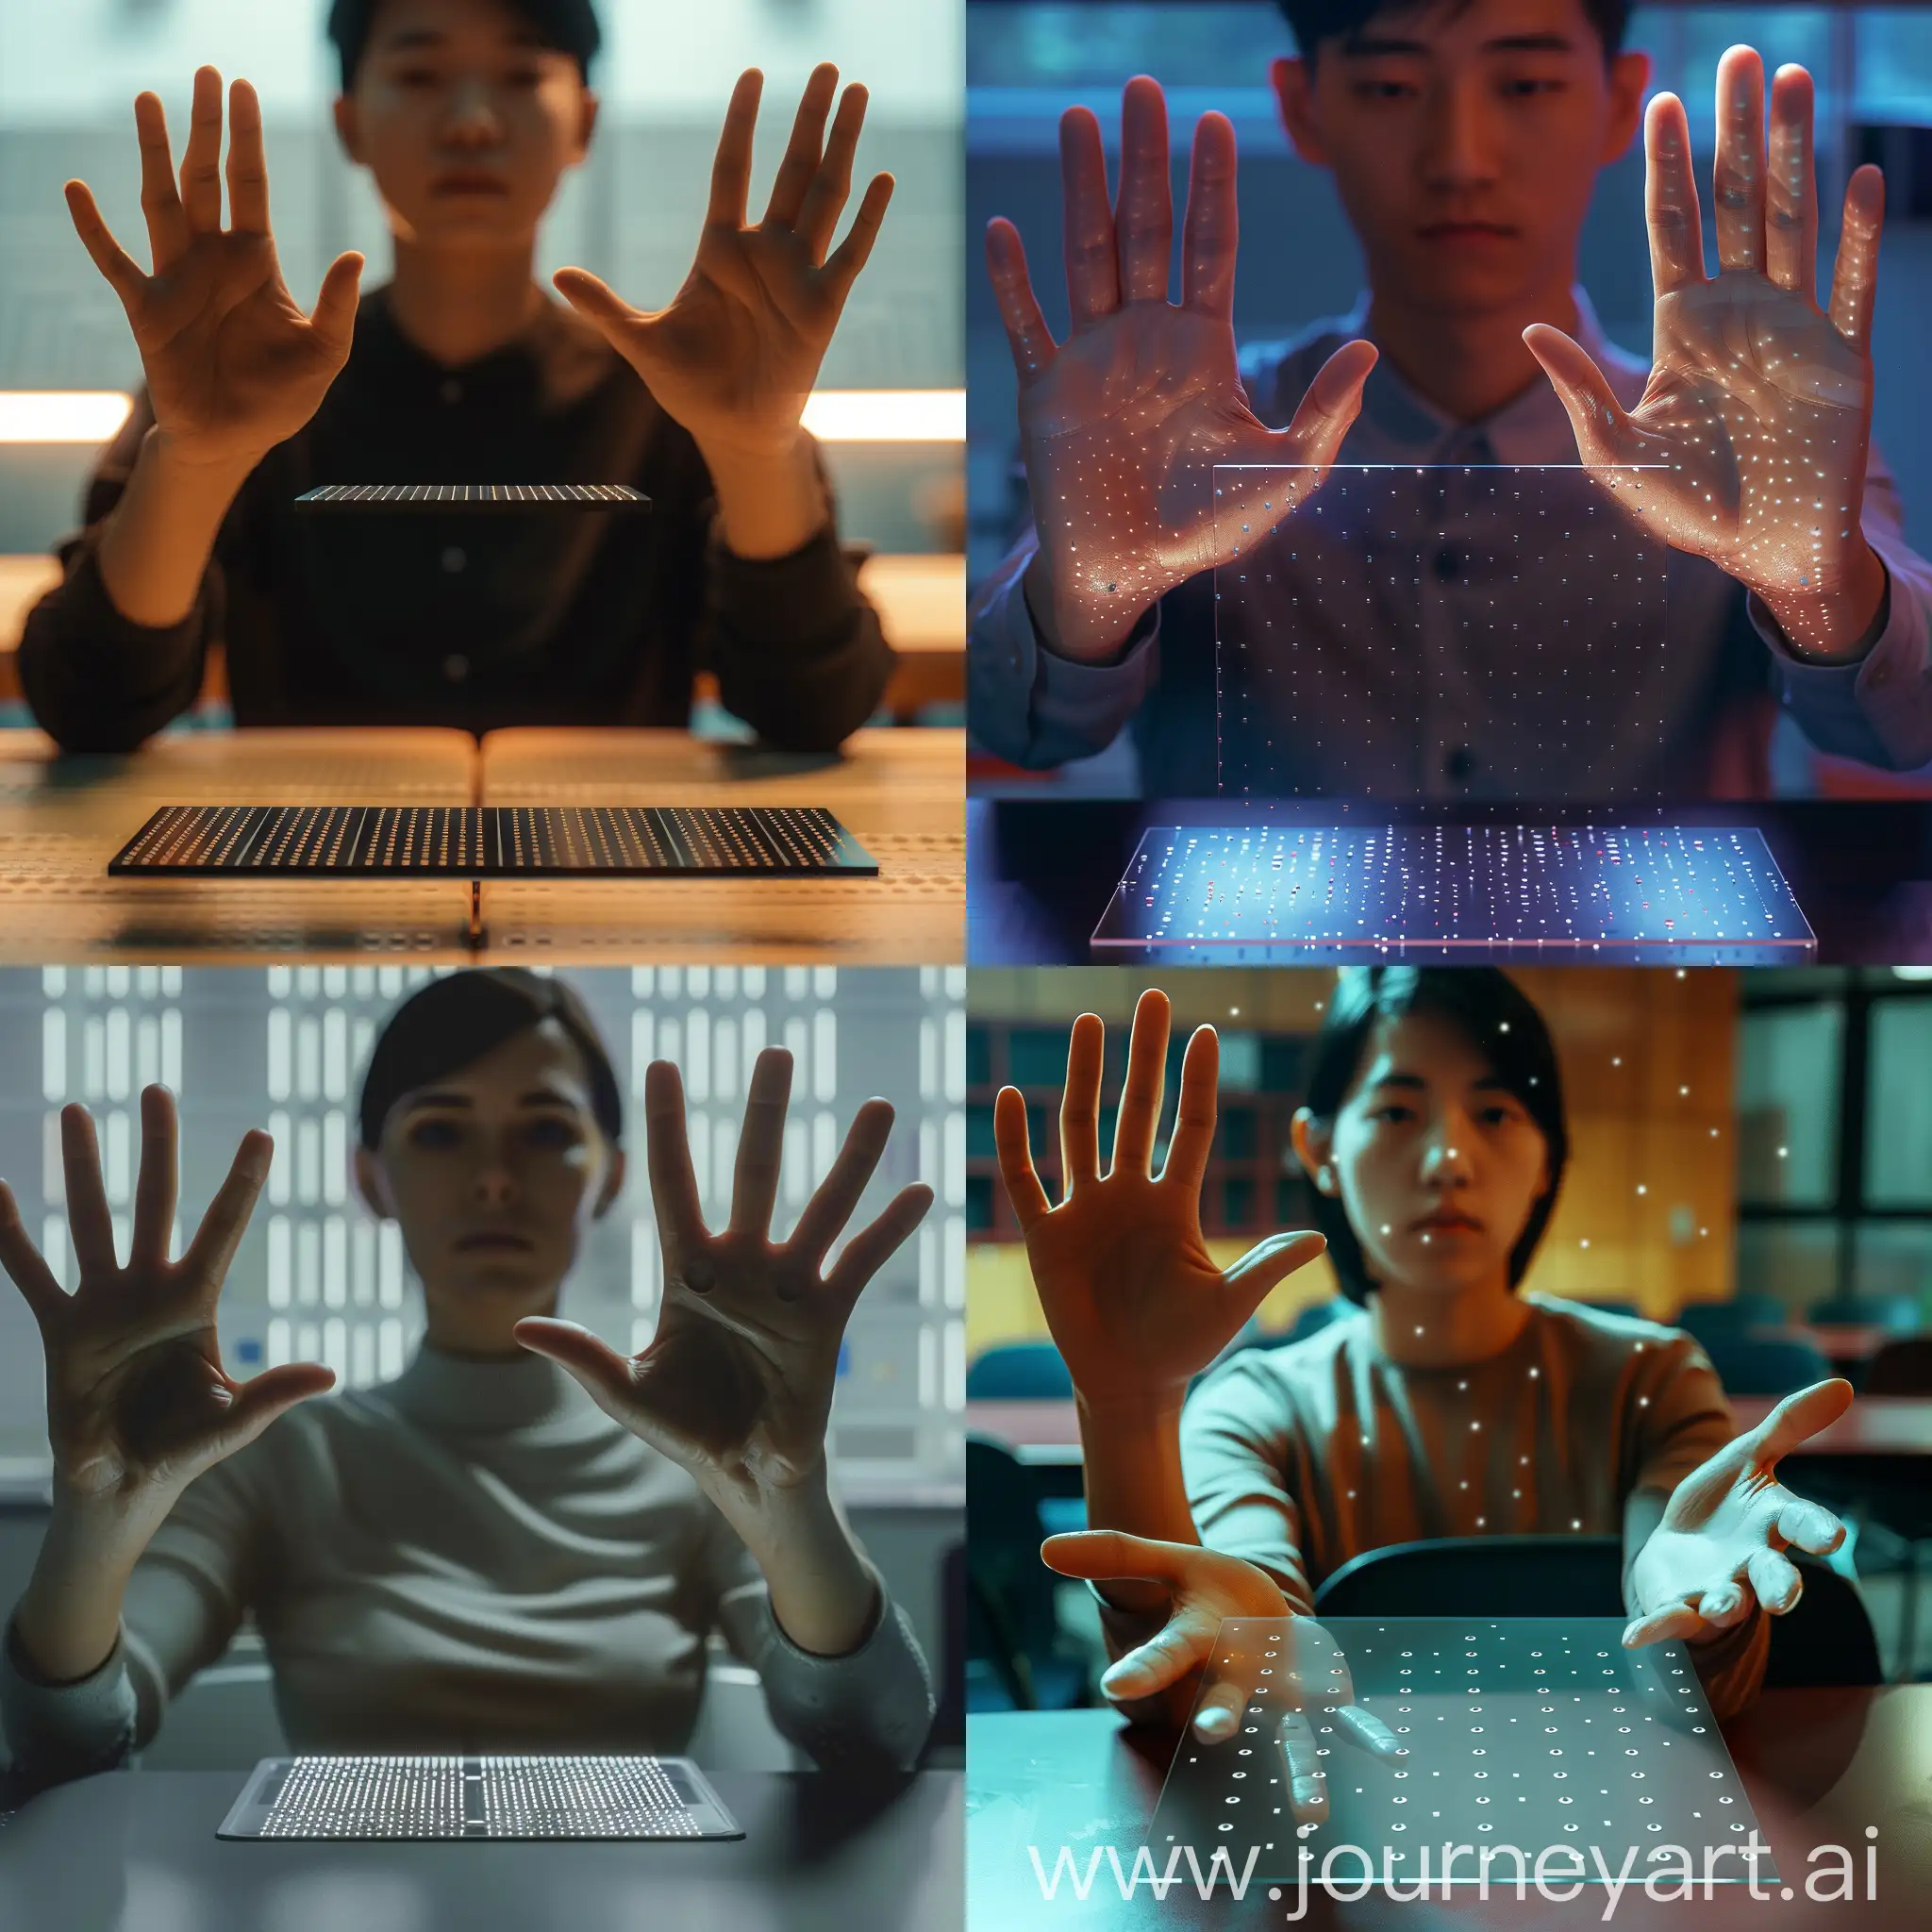 photo realistic Hyperbole,8k photo of a person sitting in front of the camera, one hand raised , both palms facing down ,bottom of palm facing top of flat array, with tiny holes, both hands is held palm face down over flat array, under the palm of the hand, palm faced down, in an educational environment, the image focuses on their upper body and hands as they interact , which are indicated by their focused gaze and hand movements in the empty space in front of them, The person is surrounded by a futuristic classroom setting, illuminated with soft, ambient lighting, 